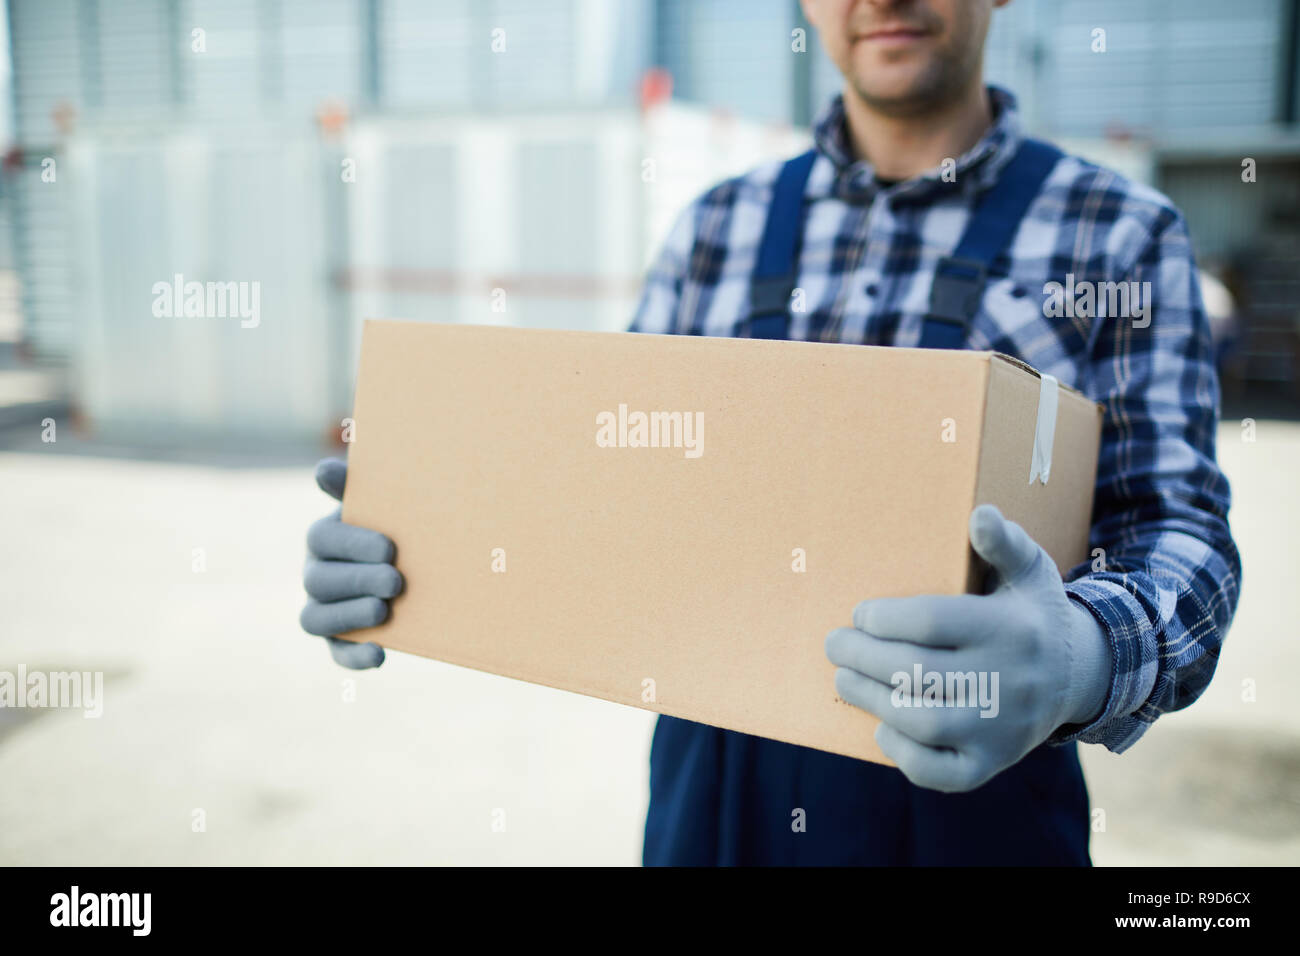 Moving company worker with box Stock Photo